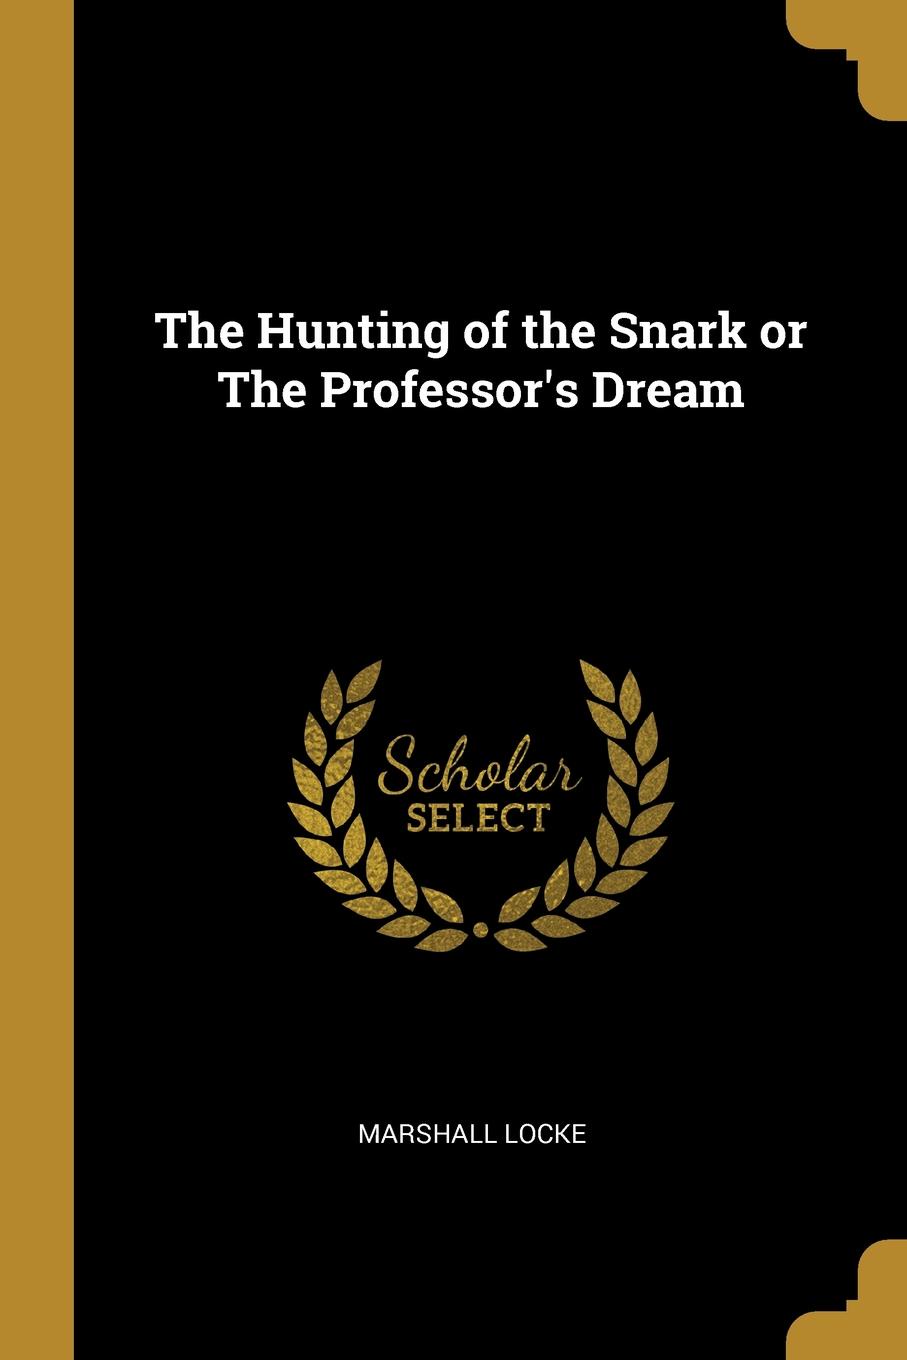 The Hunting of the Snark or The Professor.s Dream